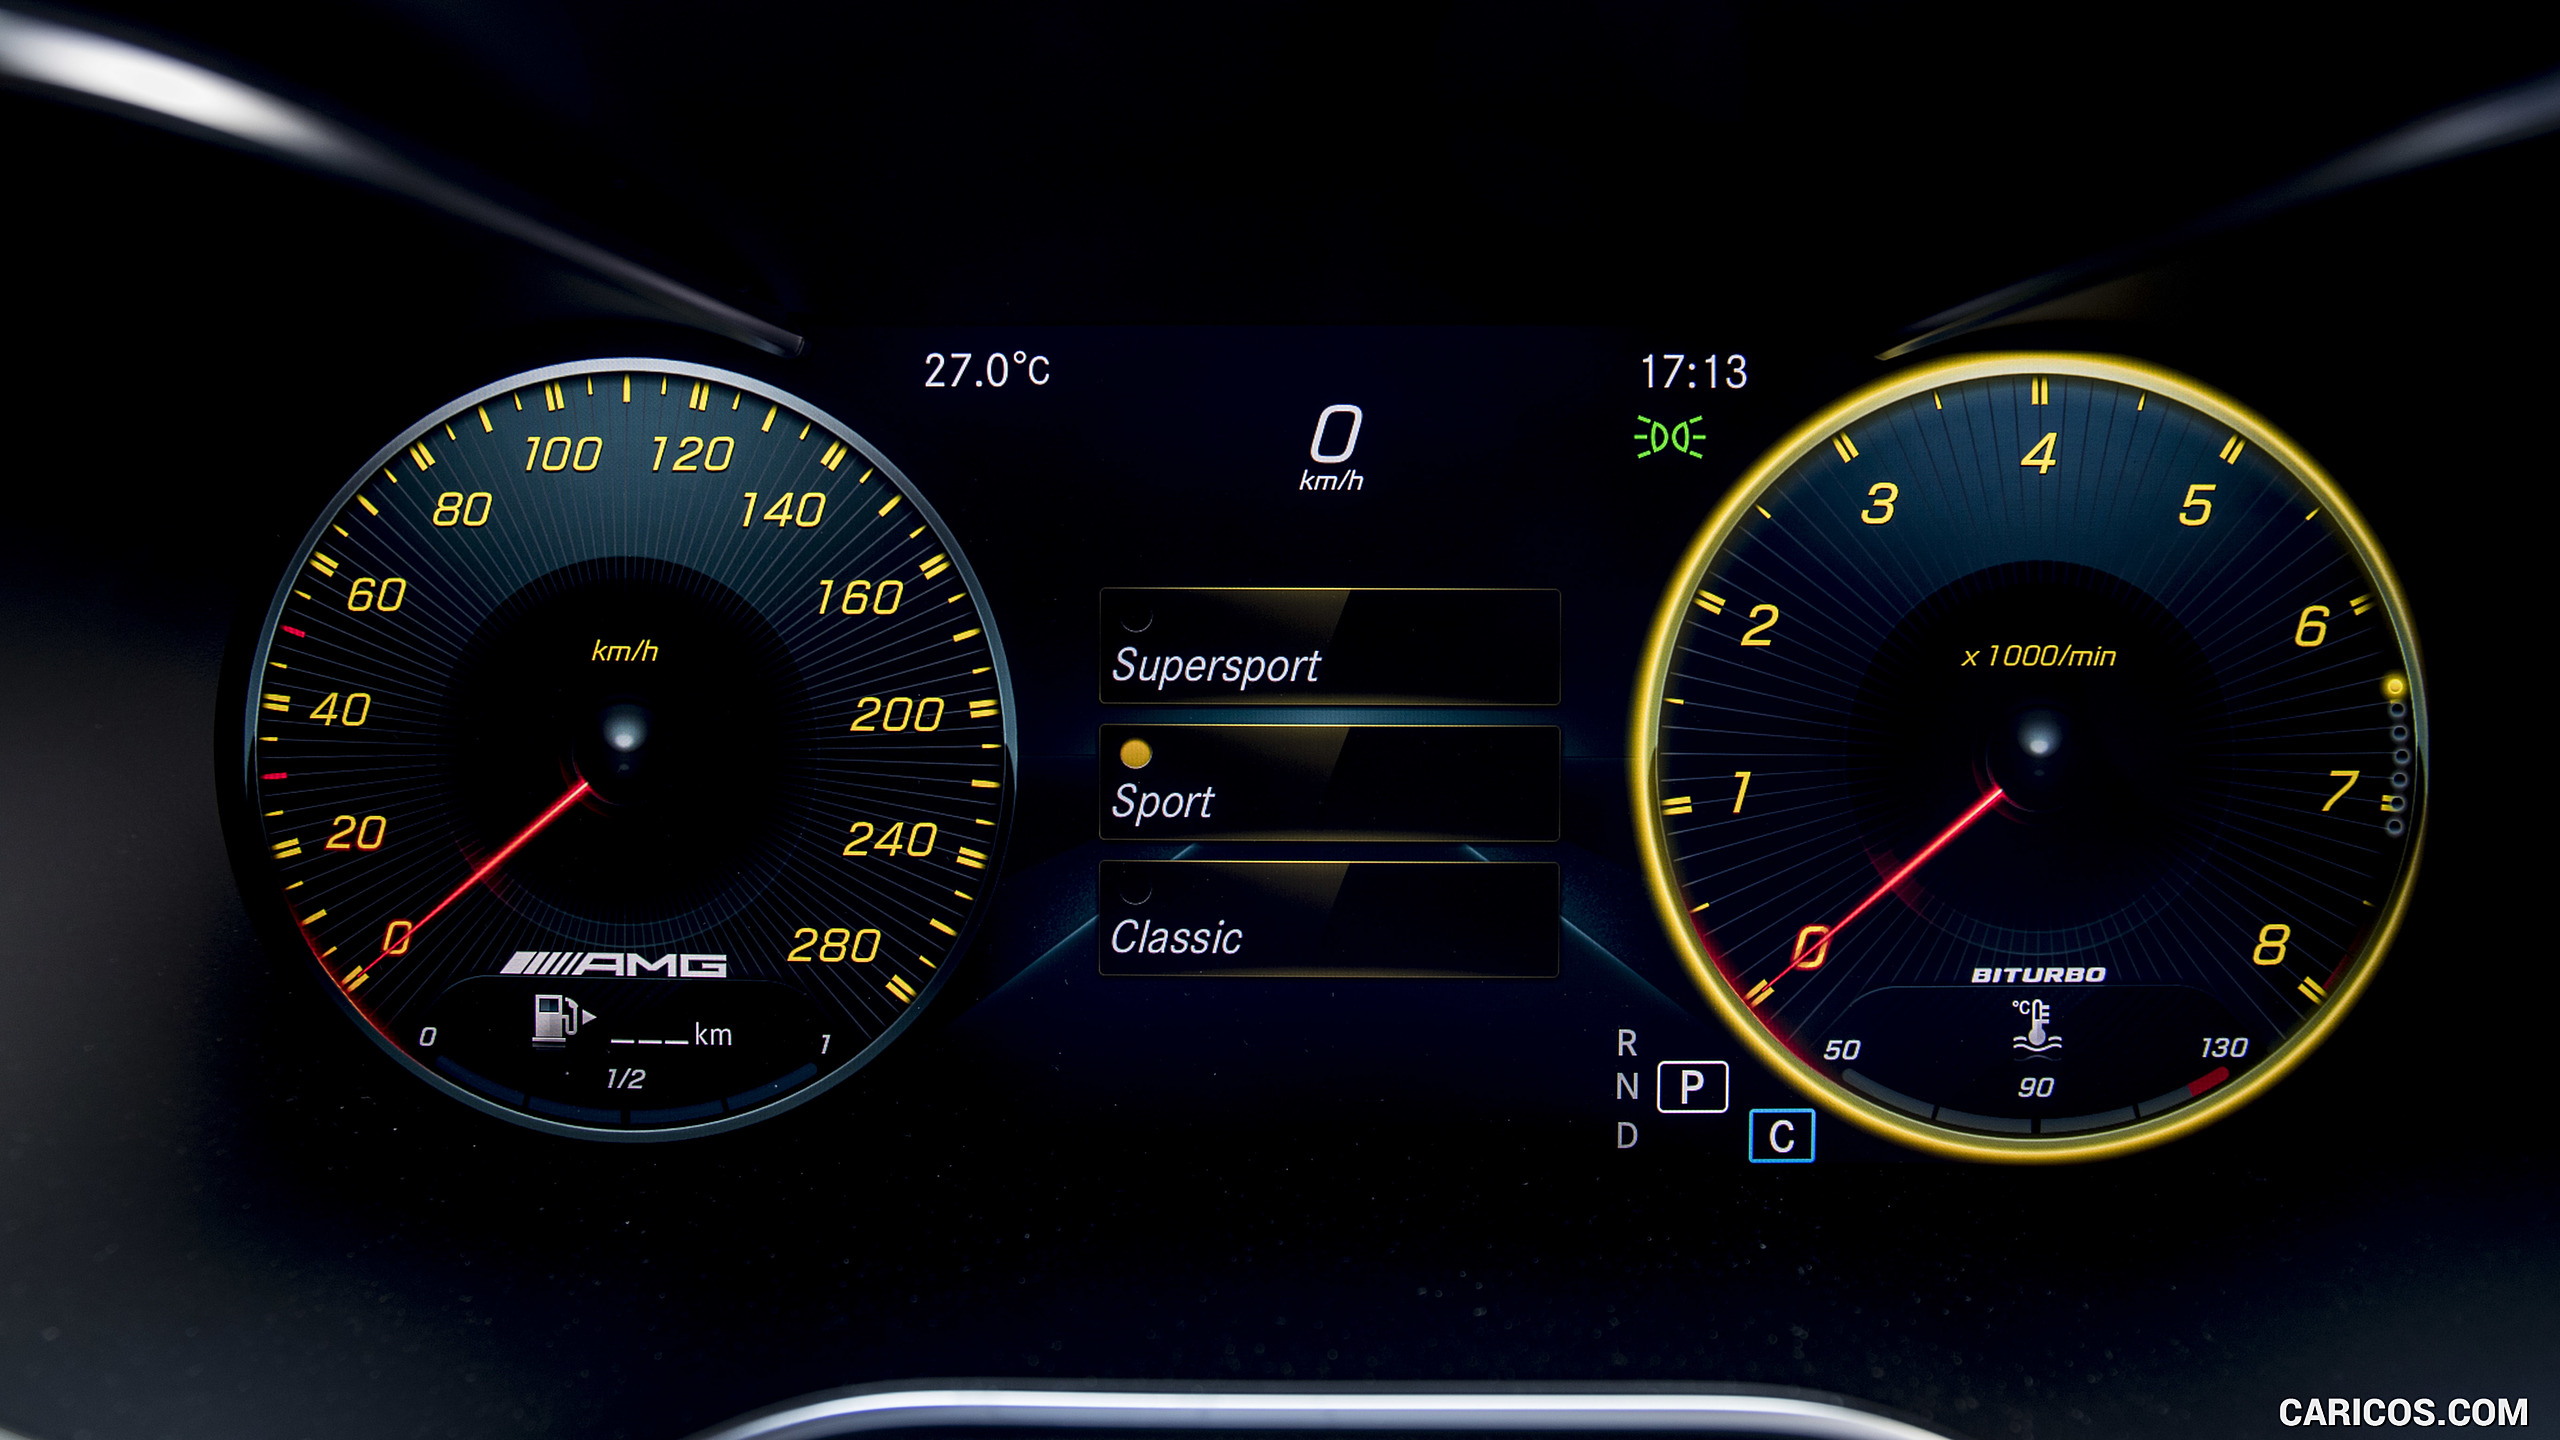 2019 Mercedes-AMG C43 4MATIC Coupe - Digital Instrument Cluster, #106 of 184